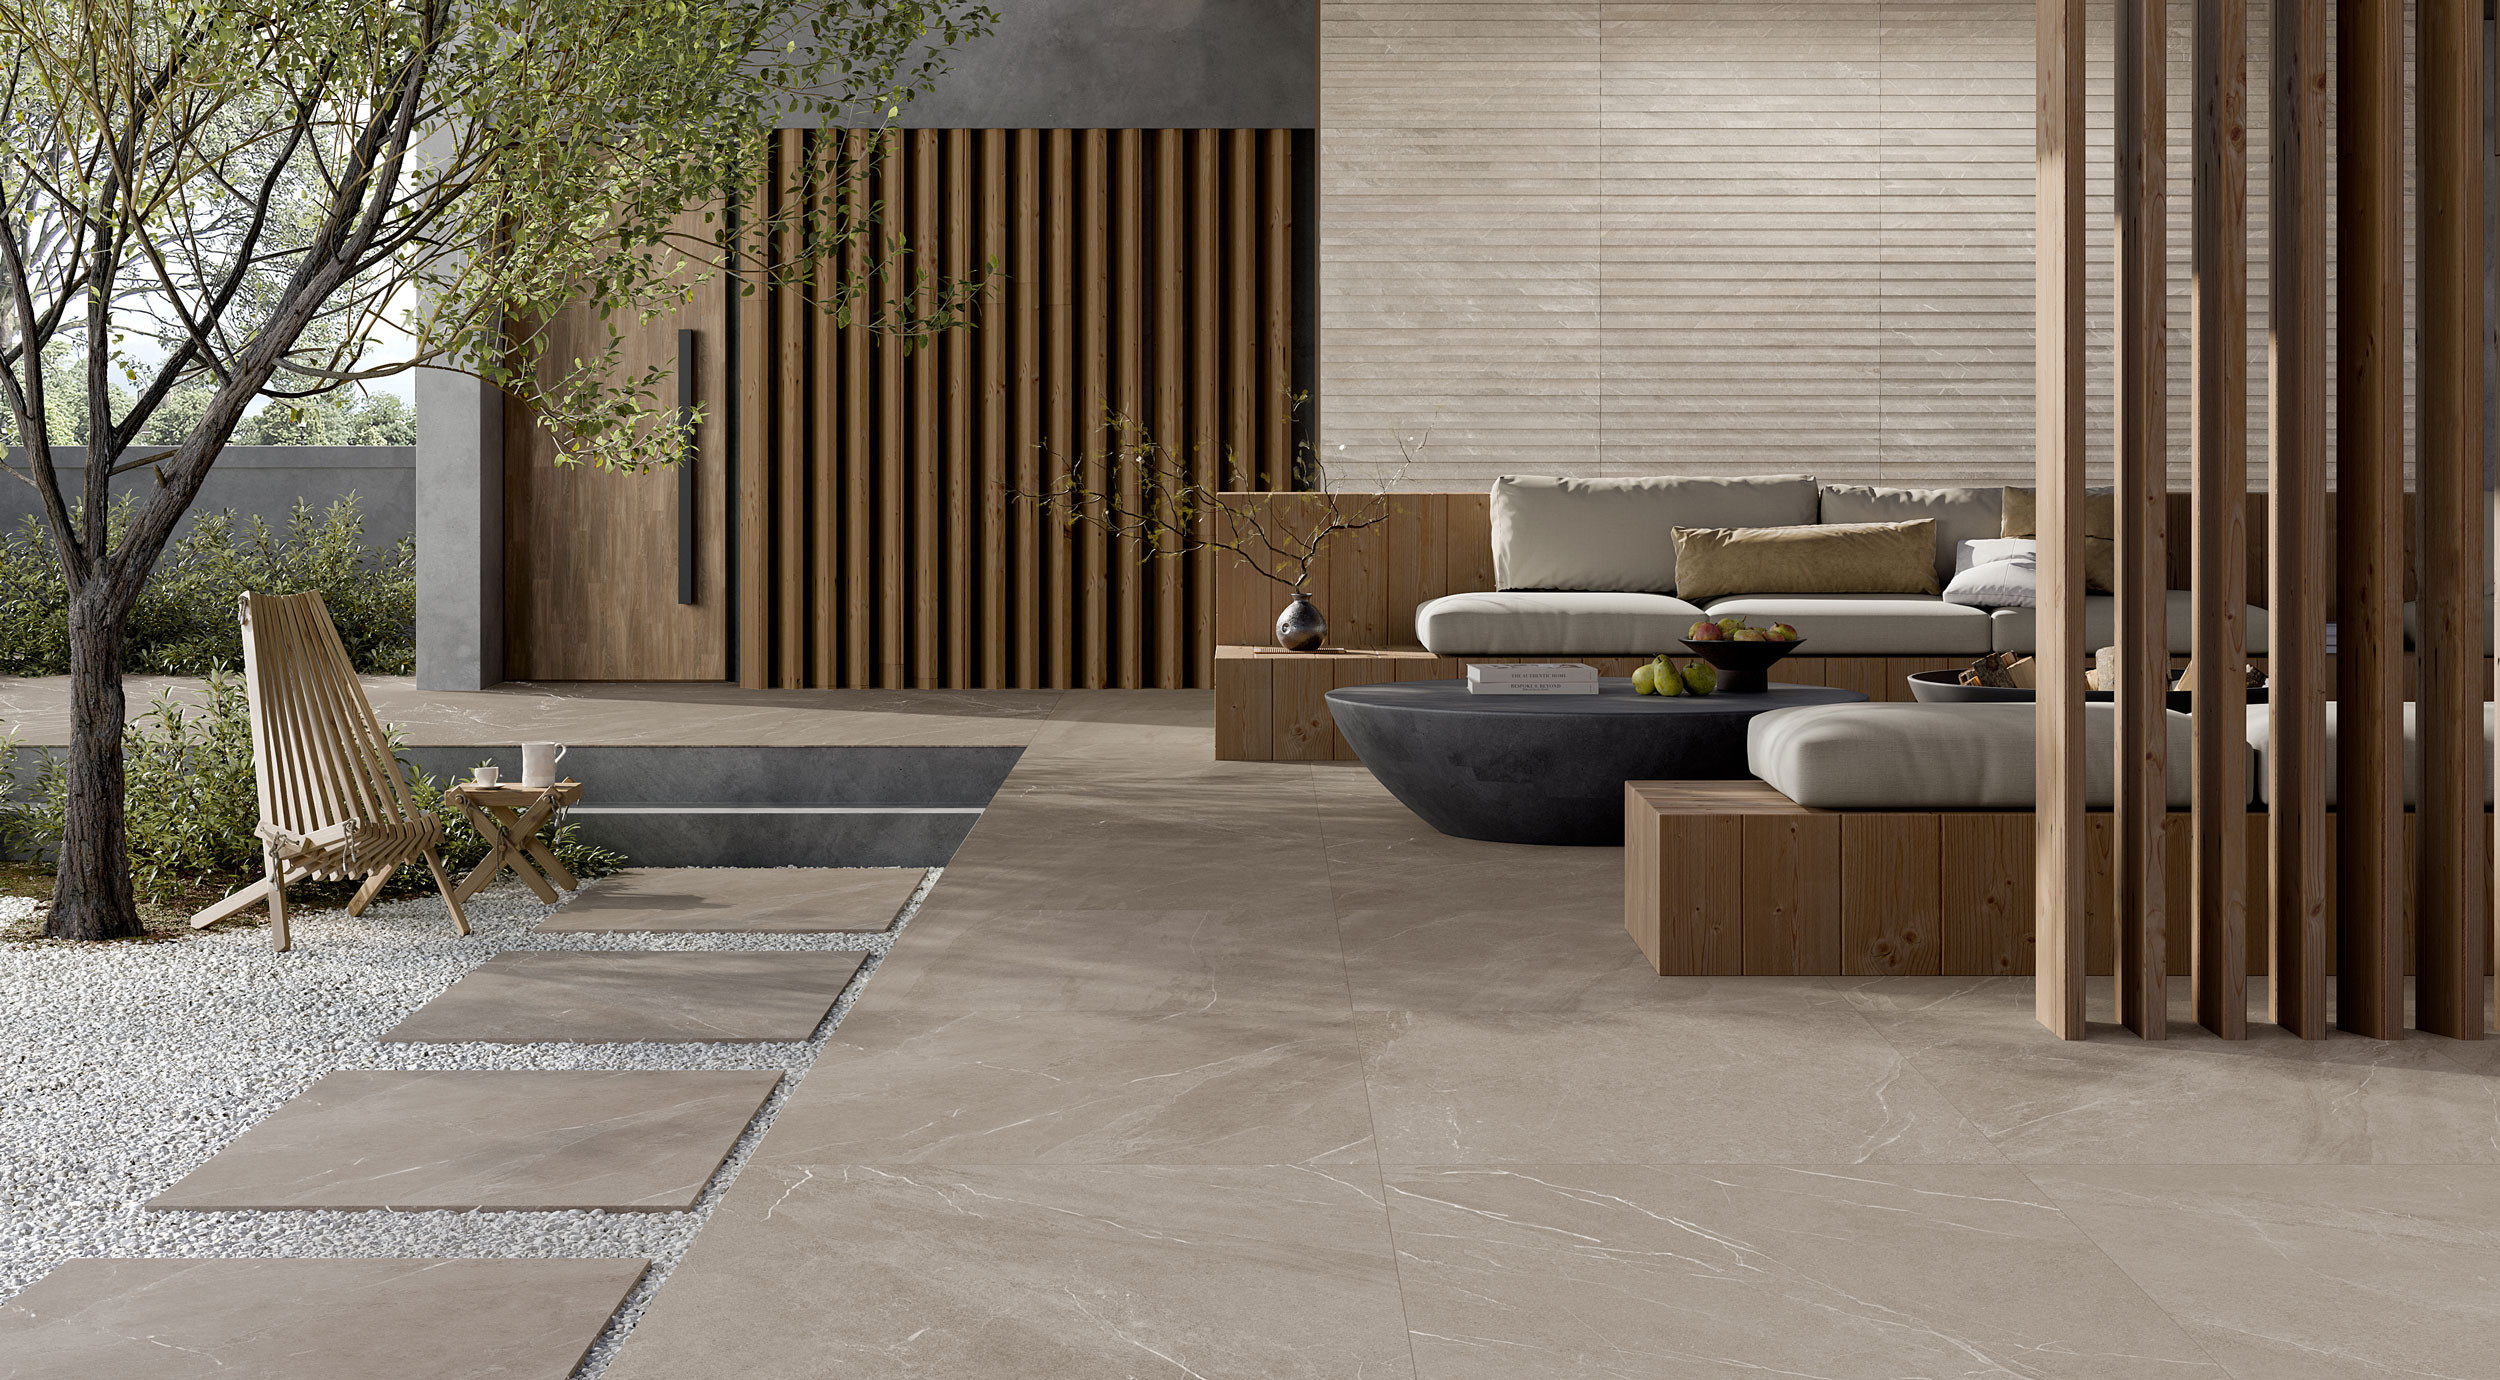 Angers Taupe R11 2 cm stoneware floor and wall covering by Ceramica Rondine
